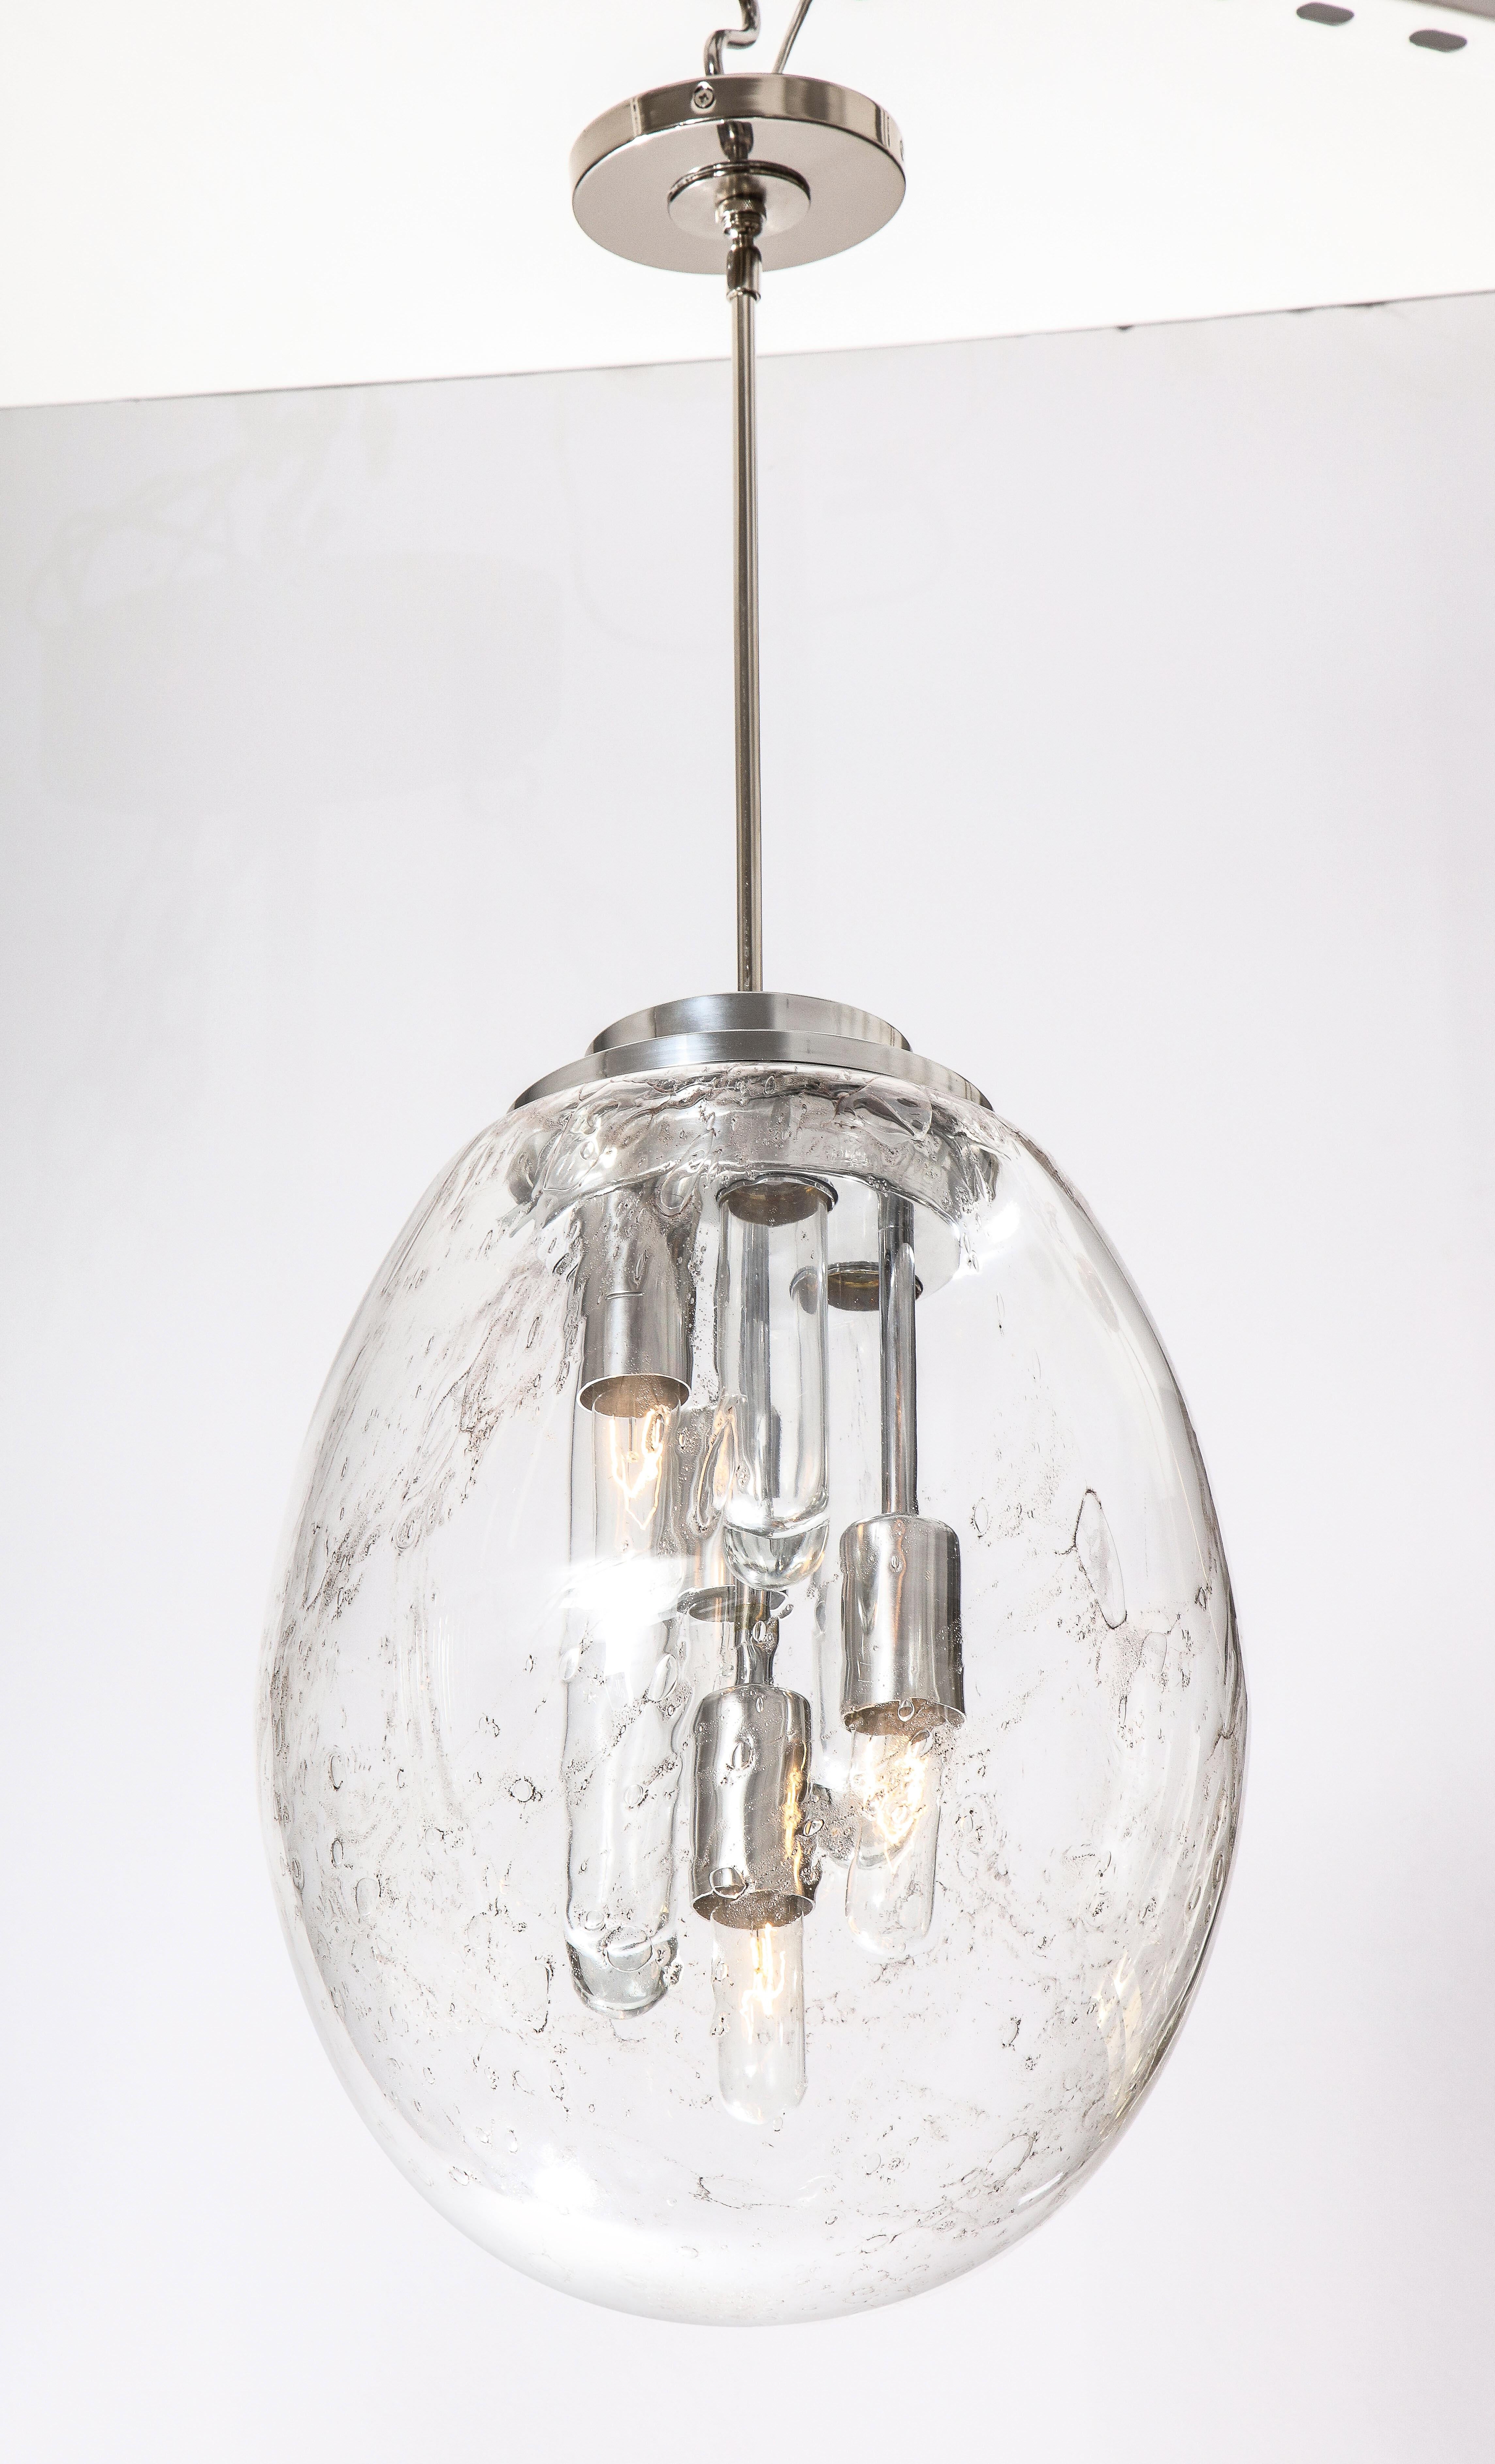 Large oval hand blown Murano glass pendant light by Doria.
The Murano glass has slight grey veining and has been newly rewired for the US.
It has four standard light sockets and there are three glass tubes.
The 14